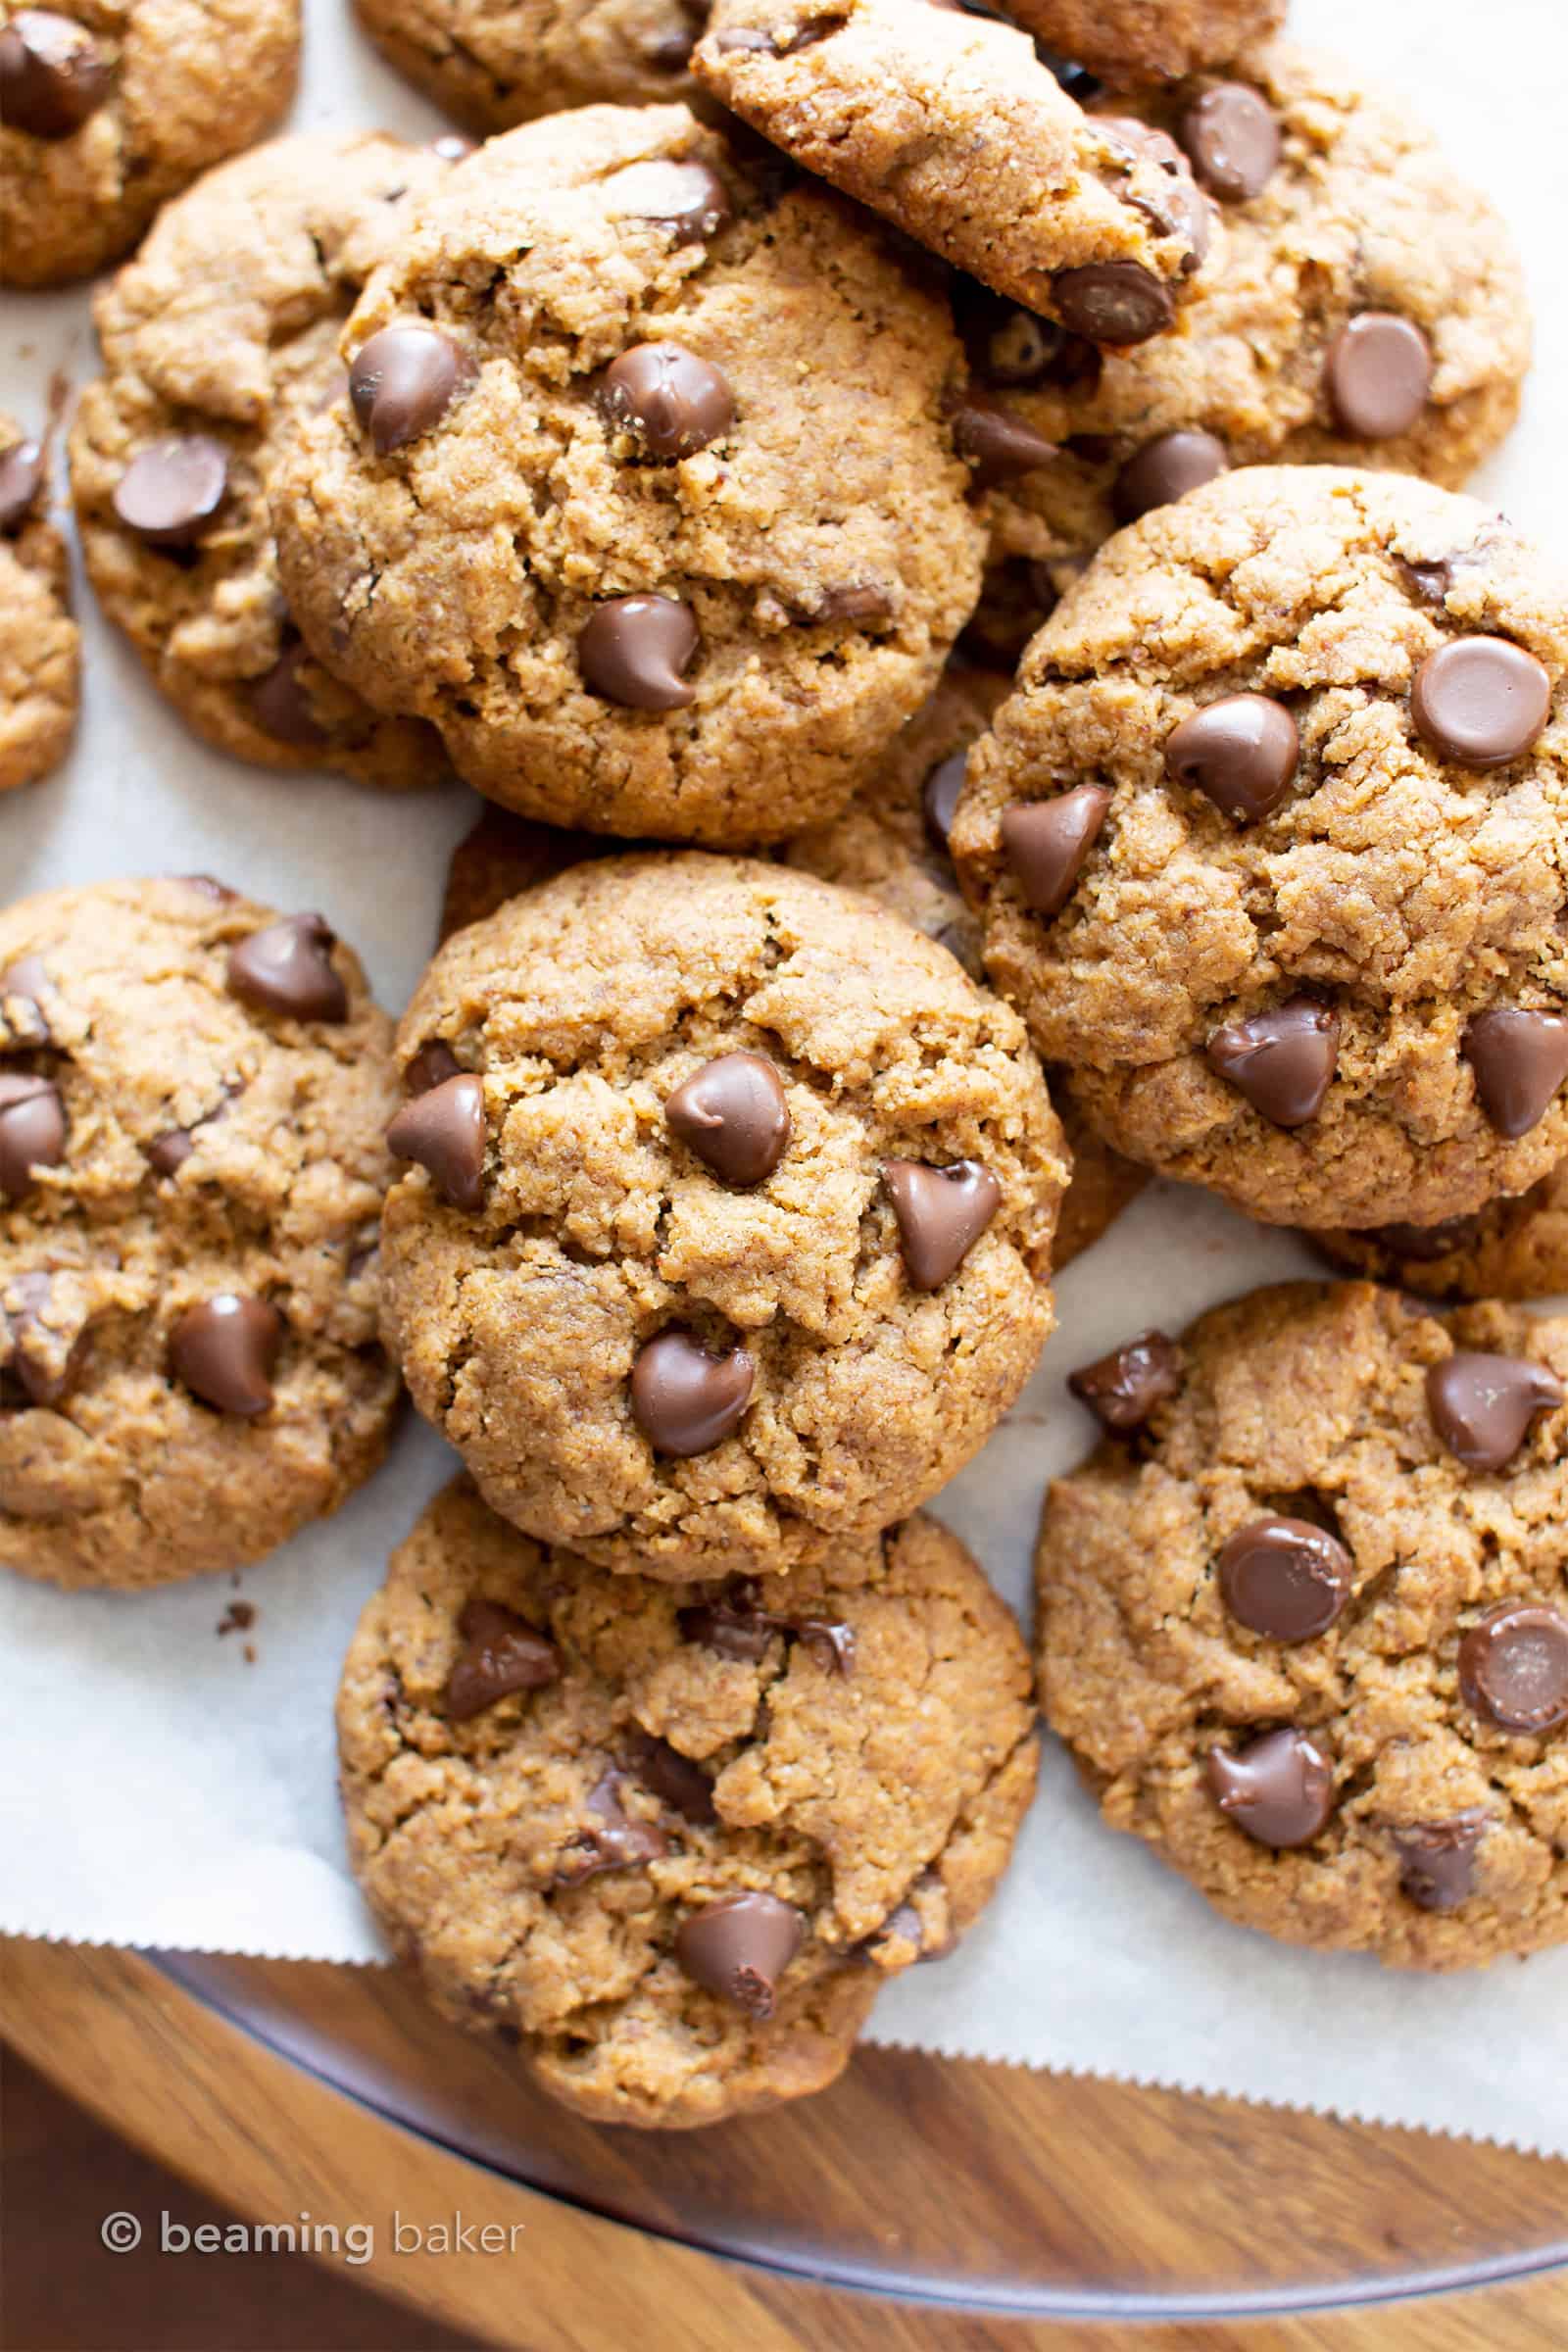 Vegan Paleo Chocolate Chip Cookies Recipe: the BEST paleo chocolate chip cookies made with coconut flour. Think: chewy exterior, soft interior, bursting with melty chocolate goodness! Meet your favorite gluten free chocolate chip cookies. #Paleo #Chocolate #Cookies #Vegan #GrainFree | Recipe at BeamingBaker.com